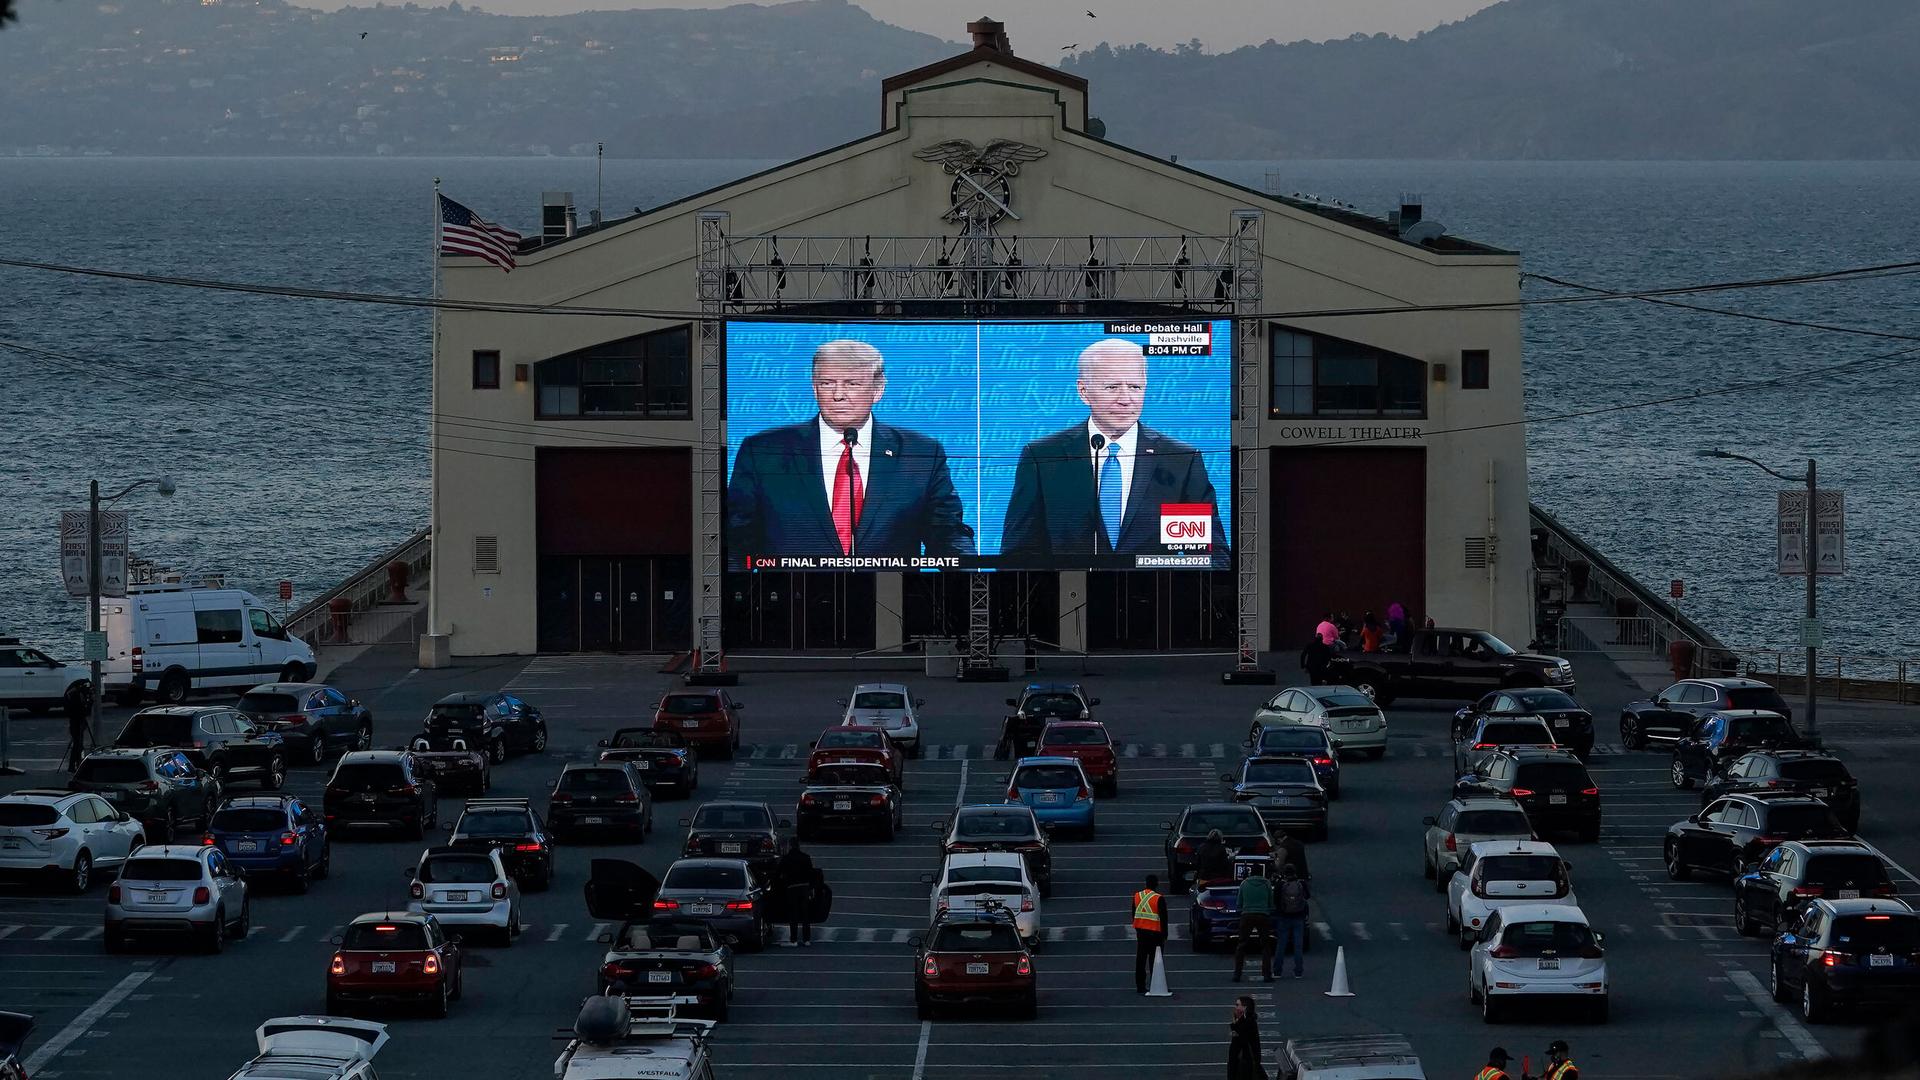 People watch from their vehicles as US President Donald Trump and Democratic presidential candidate former Vice President Joe Biden speak during a Presidential Debate Watch Party at Fort Mason Center in San Francisco, Oct. 22, 2020.